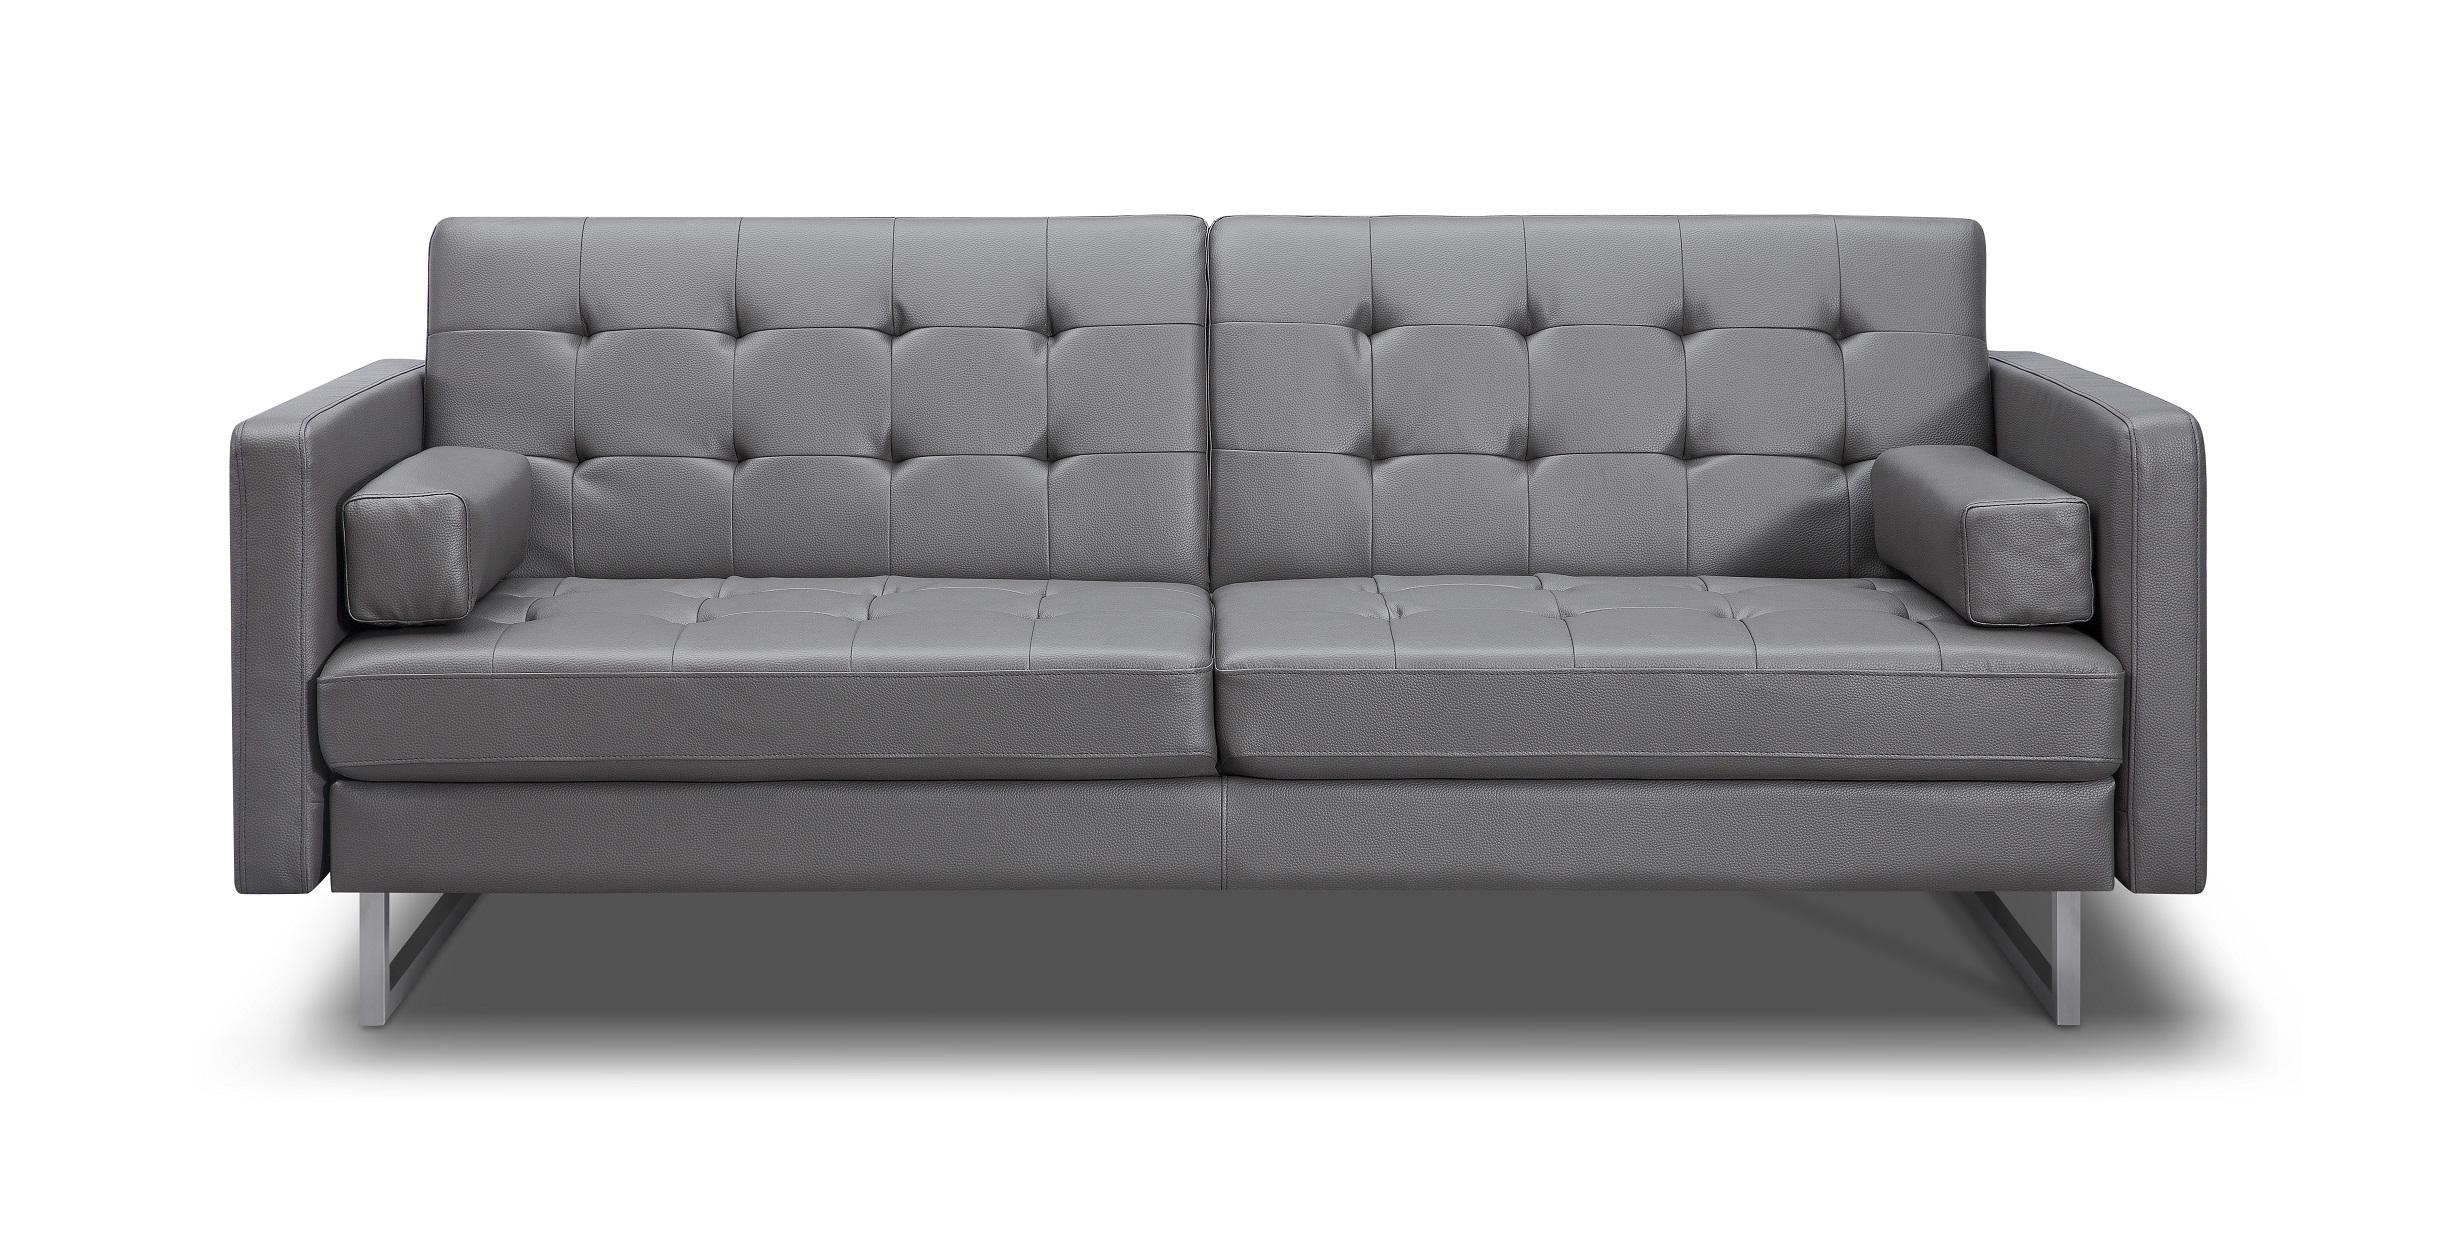 Modern Sofa bed SO1195P-GRY Giovanni SO1195P-GRY in Gray Faux Leather